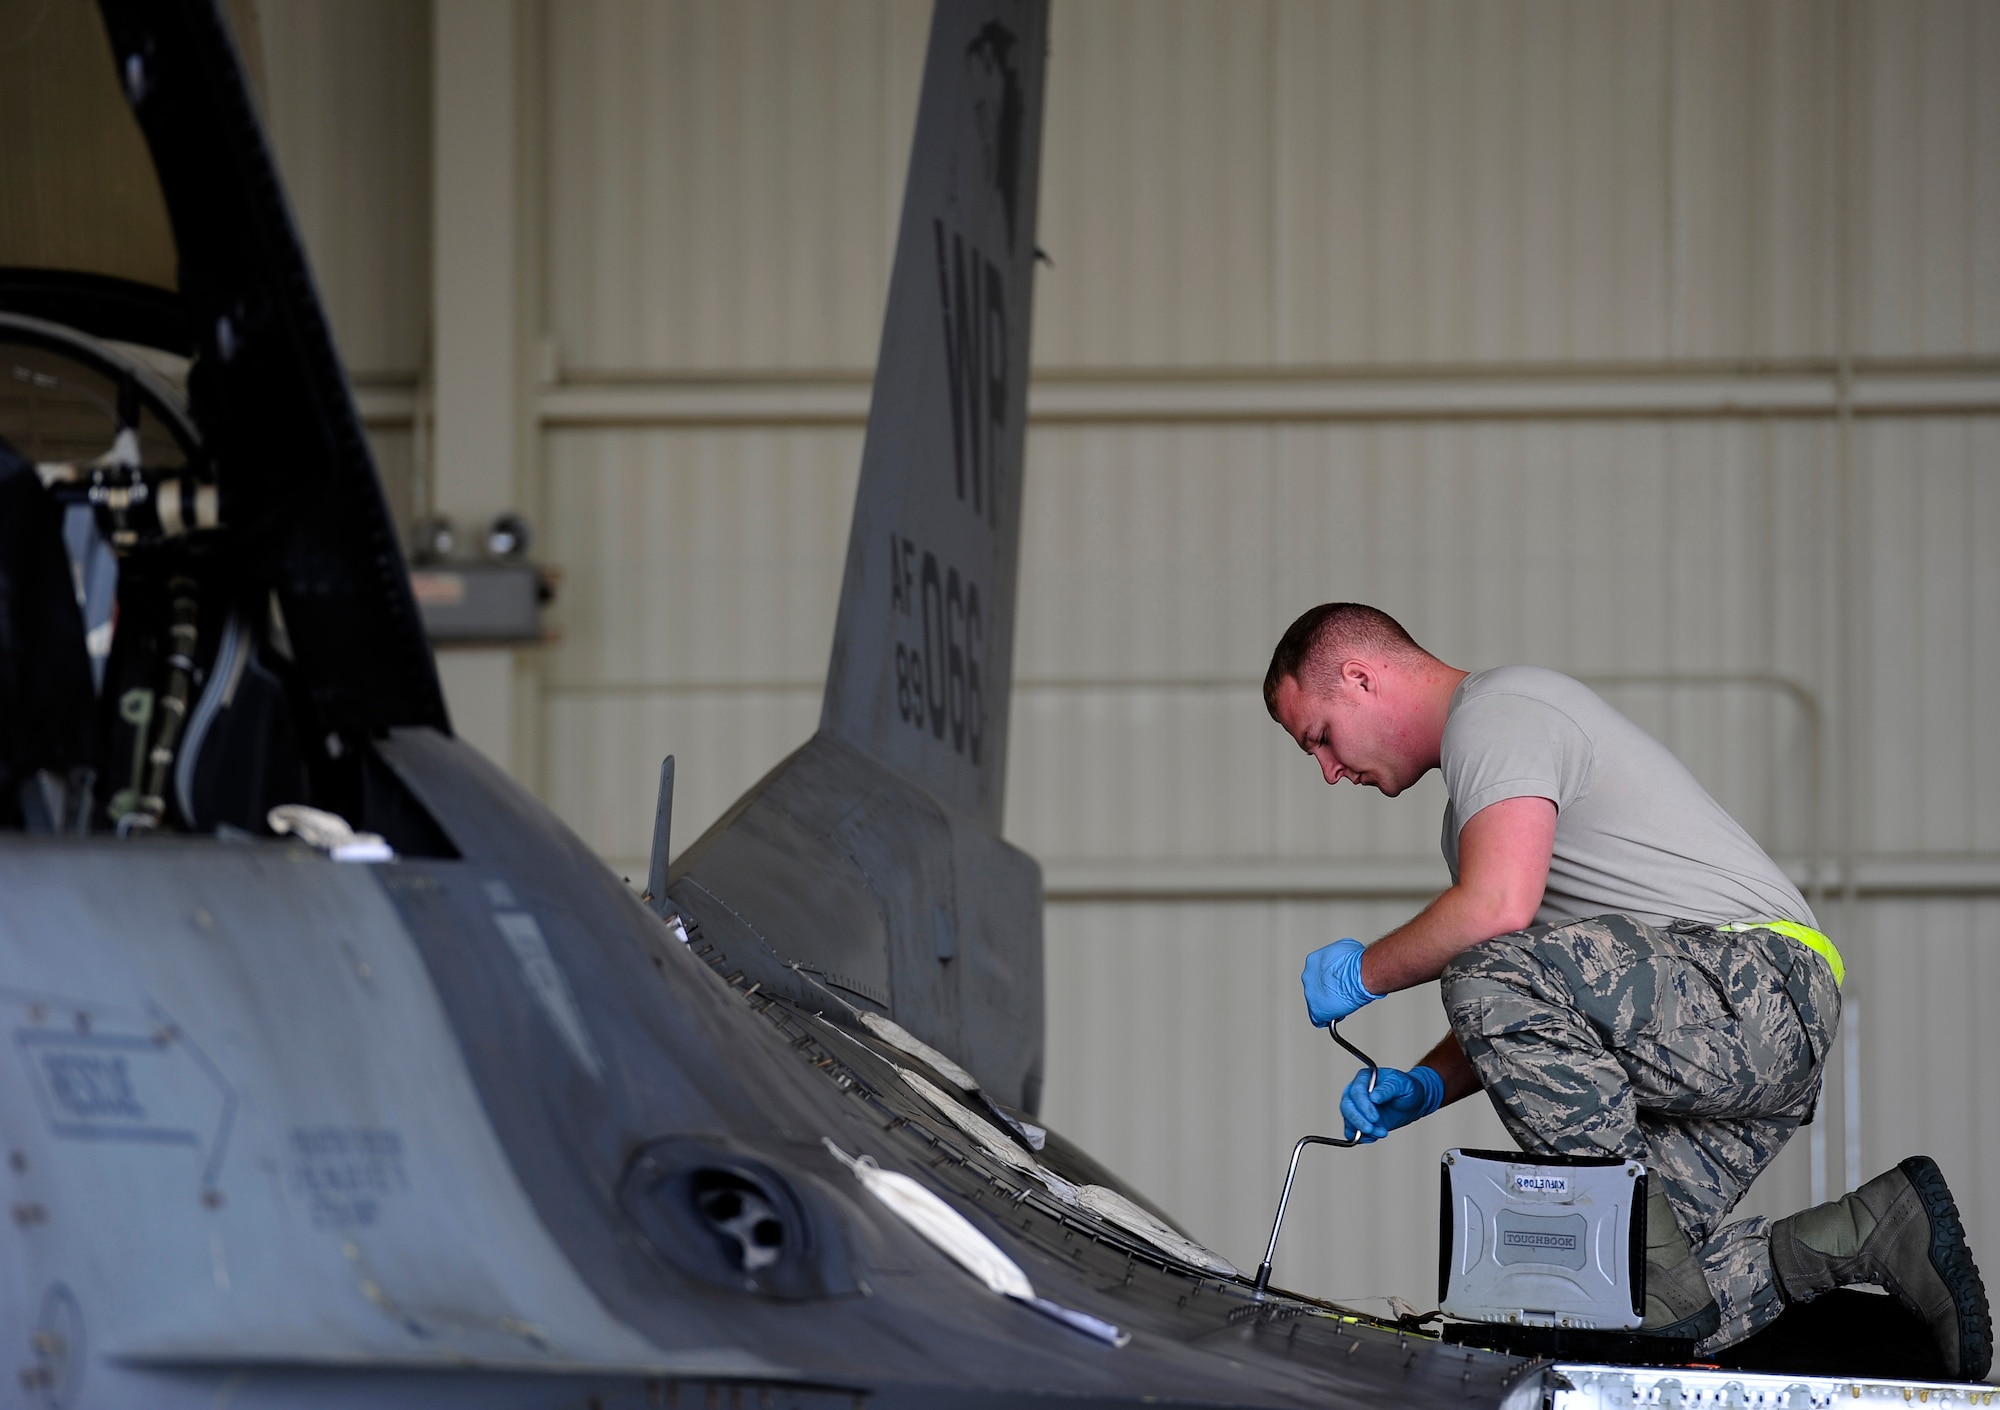 Senior Airman Jacob Clark, 8th Maintenance Squadron aircraft fuels systems journeyman, inspects an F-16 Fighting Falcon at Kunsan Air Base, Republic of Korea, Oct. 29, 2015. The fuels section is responsible for inspecting and repairing aircraft fuel systems, in-flight refueling receptacle systems, and other related components across F-16 aircraft. (U.S. Air Force photo by Staff Sgt. Nick Wilson/Released)